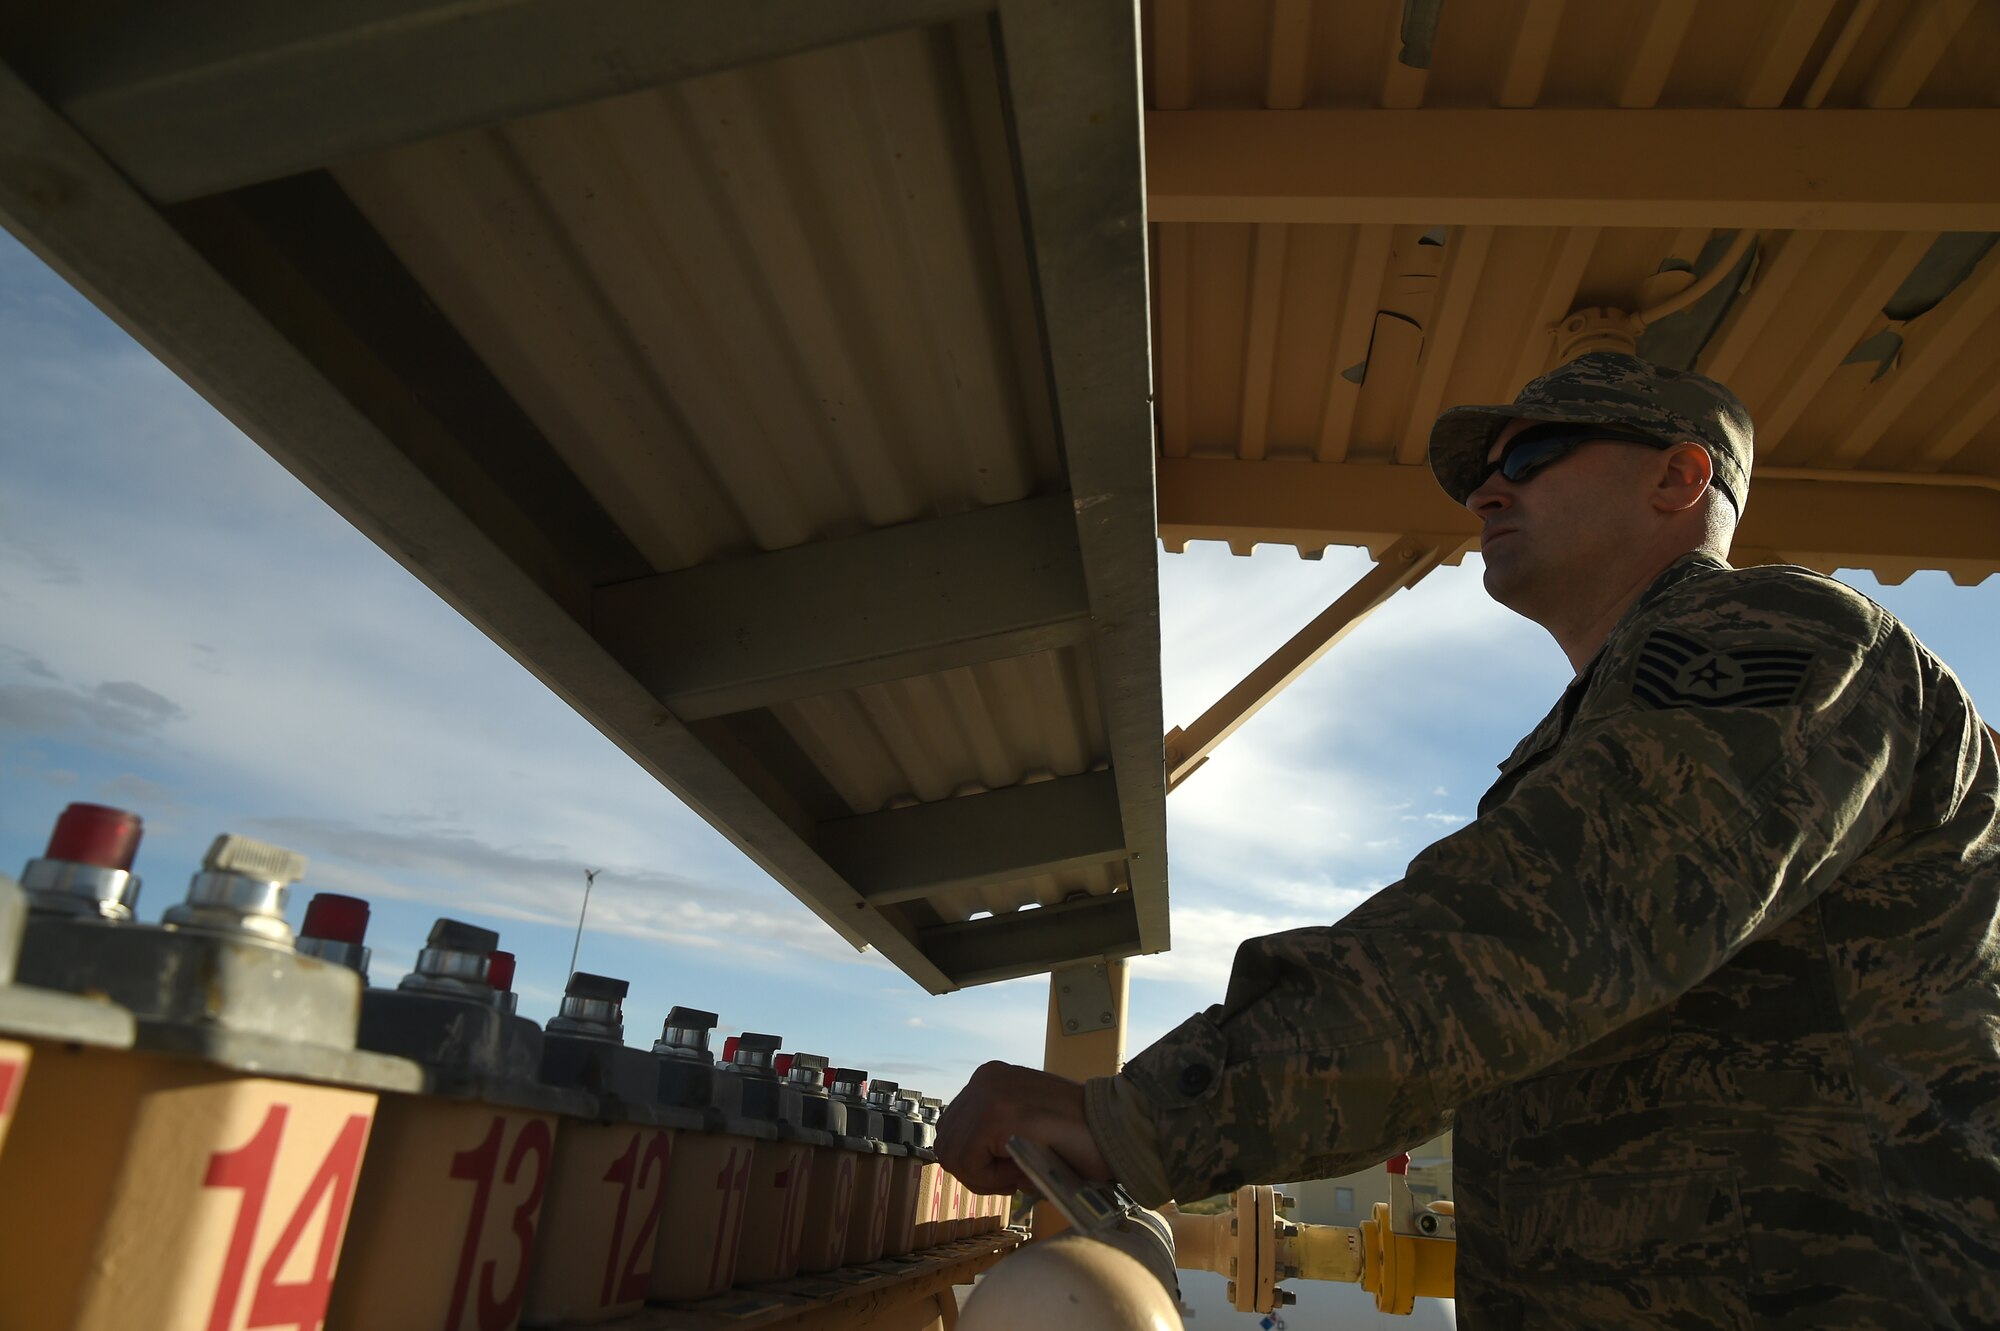 Tech. Sgt. John Muldoon, NCO in charge of training, operates the fuel and ignitor switches to control the fire sources during an aircraft live fire training exercise March 23, 2017, at Nellis Air Force Base, Nev. Muldoon communicated with the on-scene instructor to ensure the training objectives were met. (U.S. Air Force photo/Airman 1st Class James Thompson) 